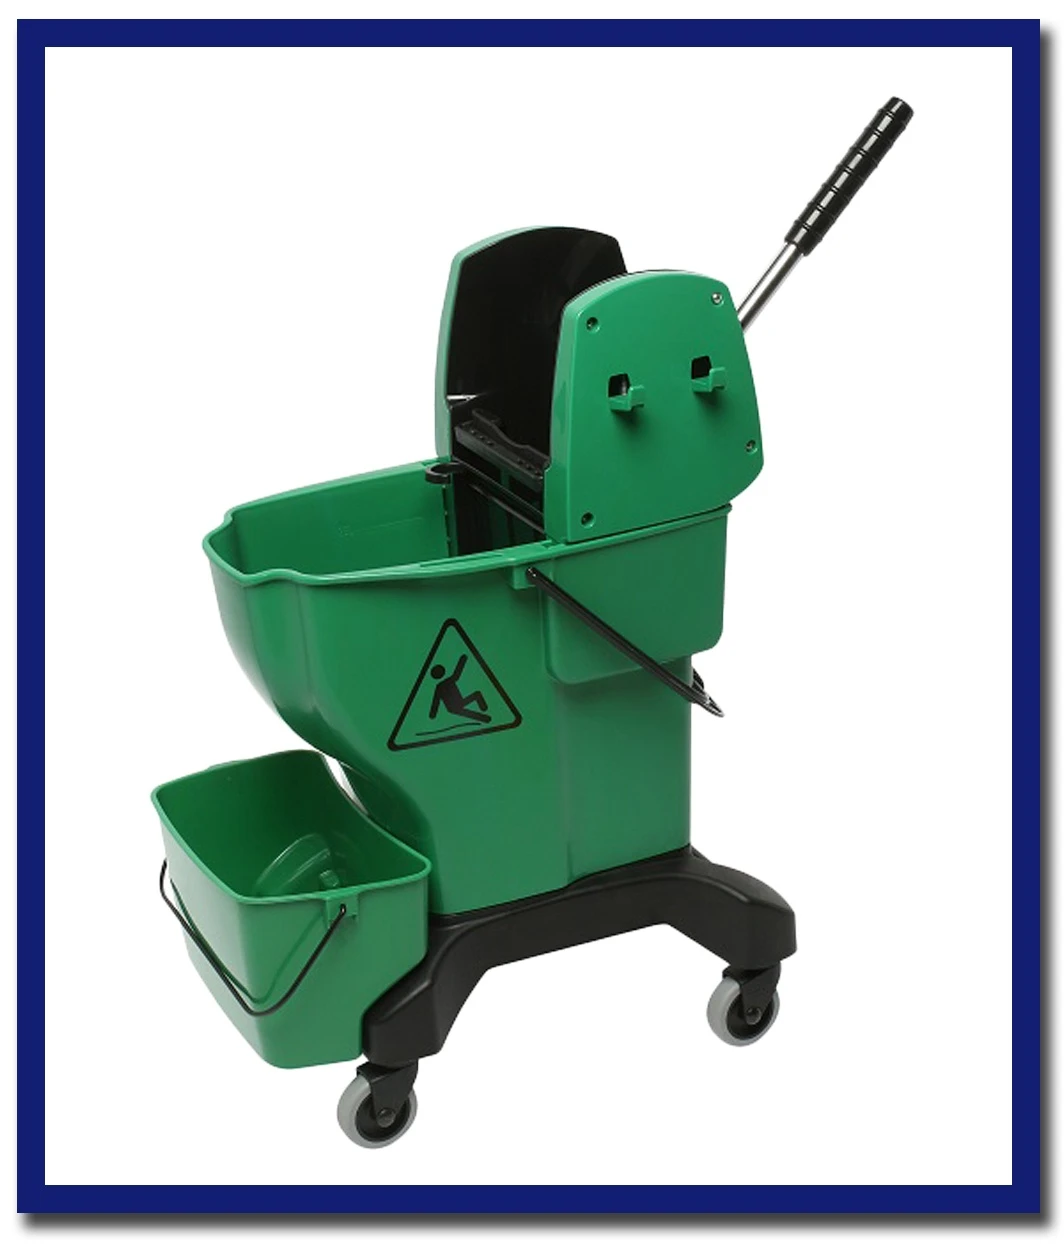 Edco Enduro Press Bucket Complete With Wringer - 1 Unit - Stone Doctor Australia - Cleaning Accessories > Mopping > Buckets